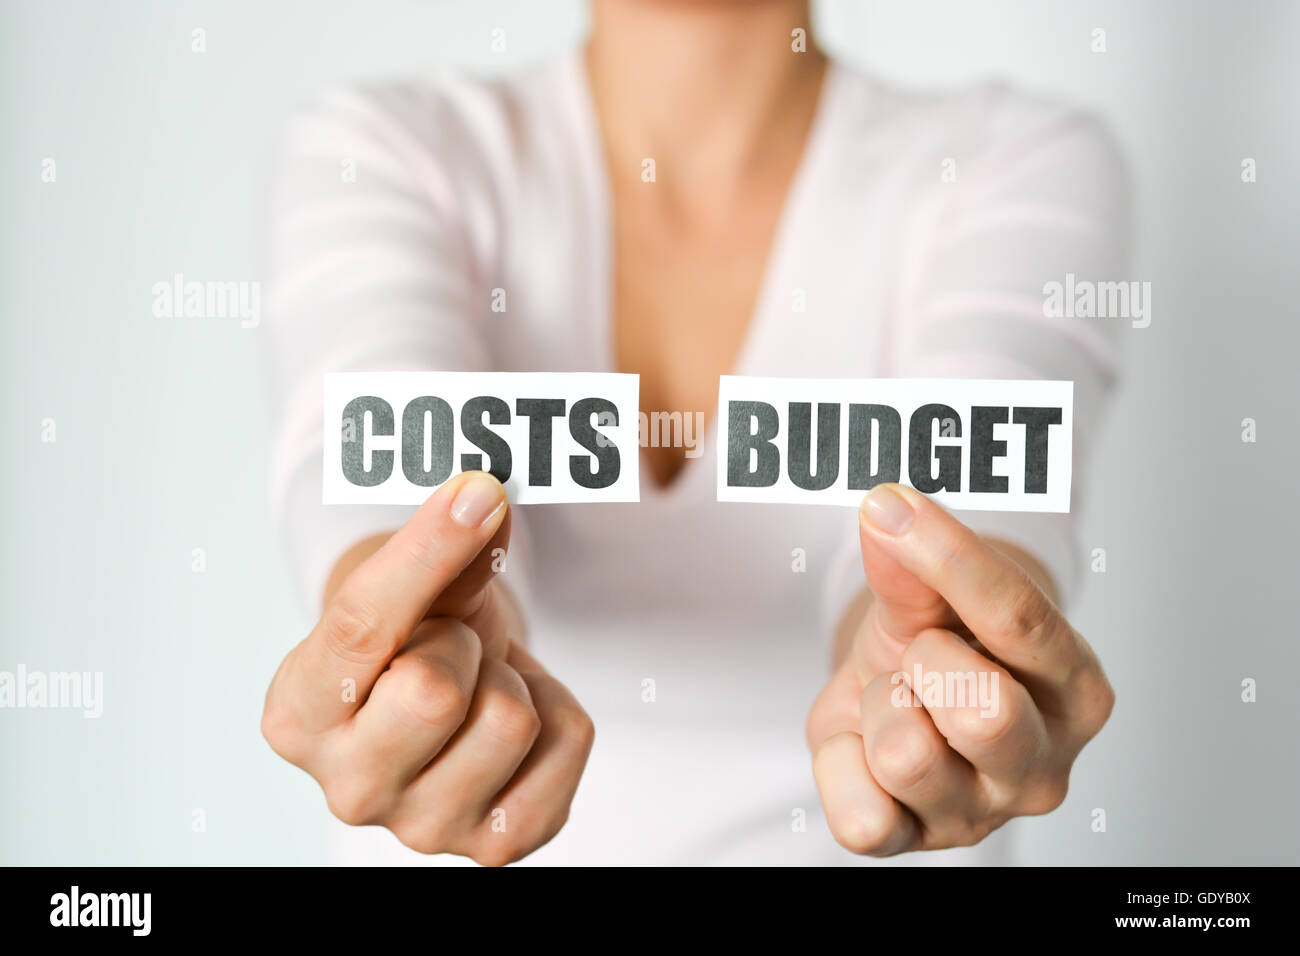 Budget planning concept with woman hands holding two printout with cost and budget words Stock Photo